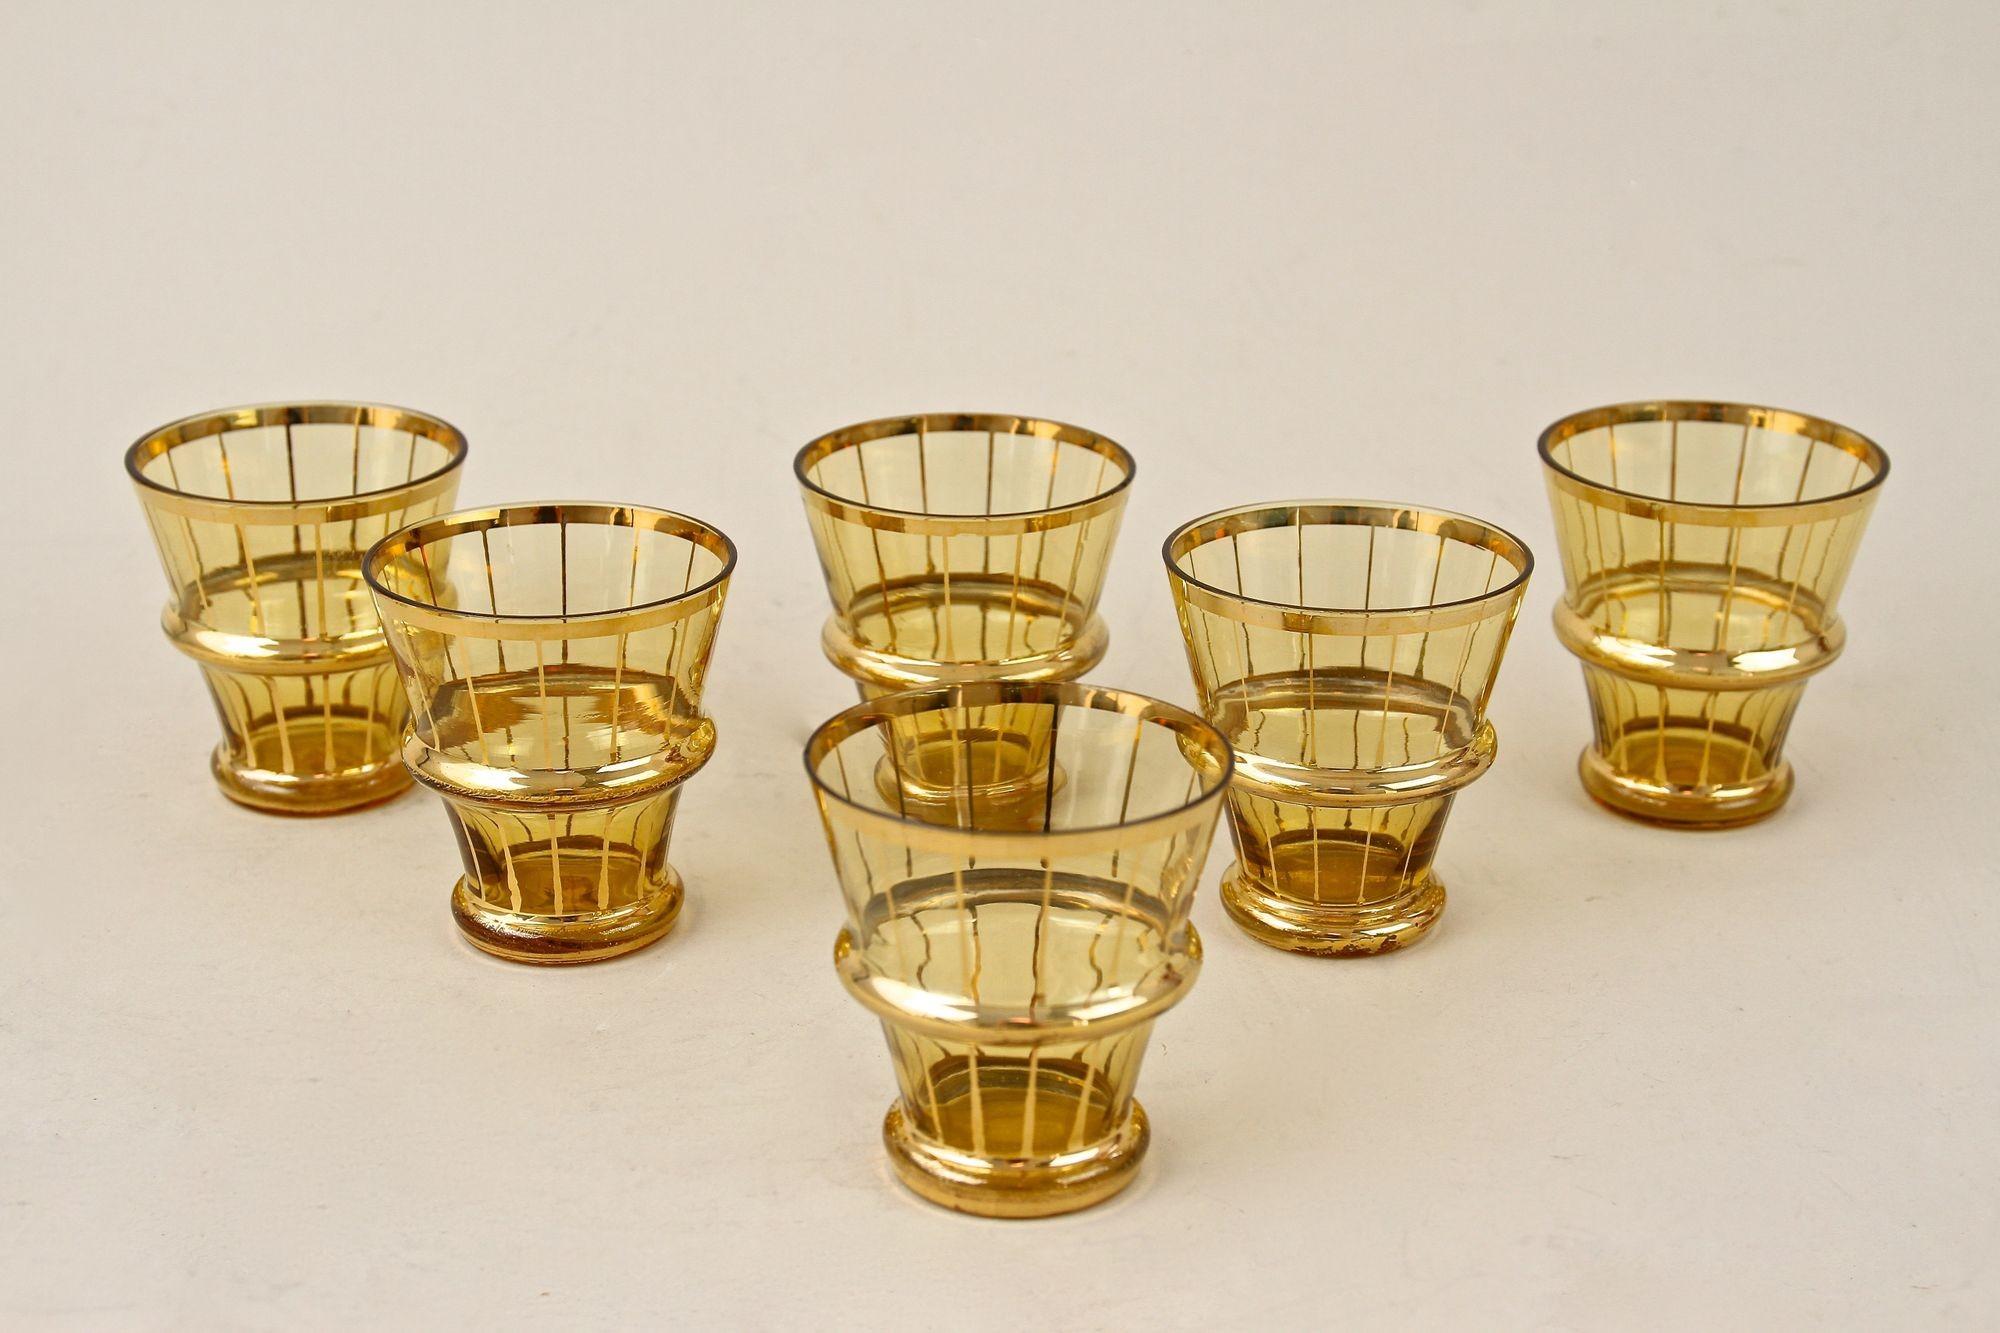 Amber Colored Gilt Art Deco Glass Decanter Set with 6 Shot Glasses, CZ ca. 1920 For Sale 6